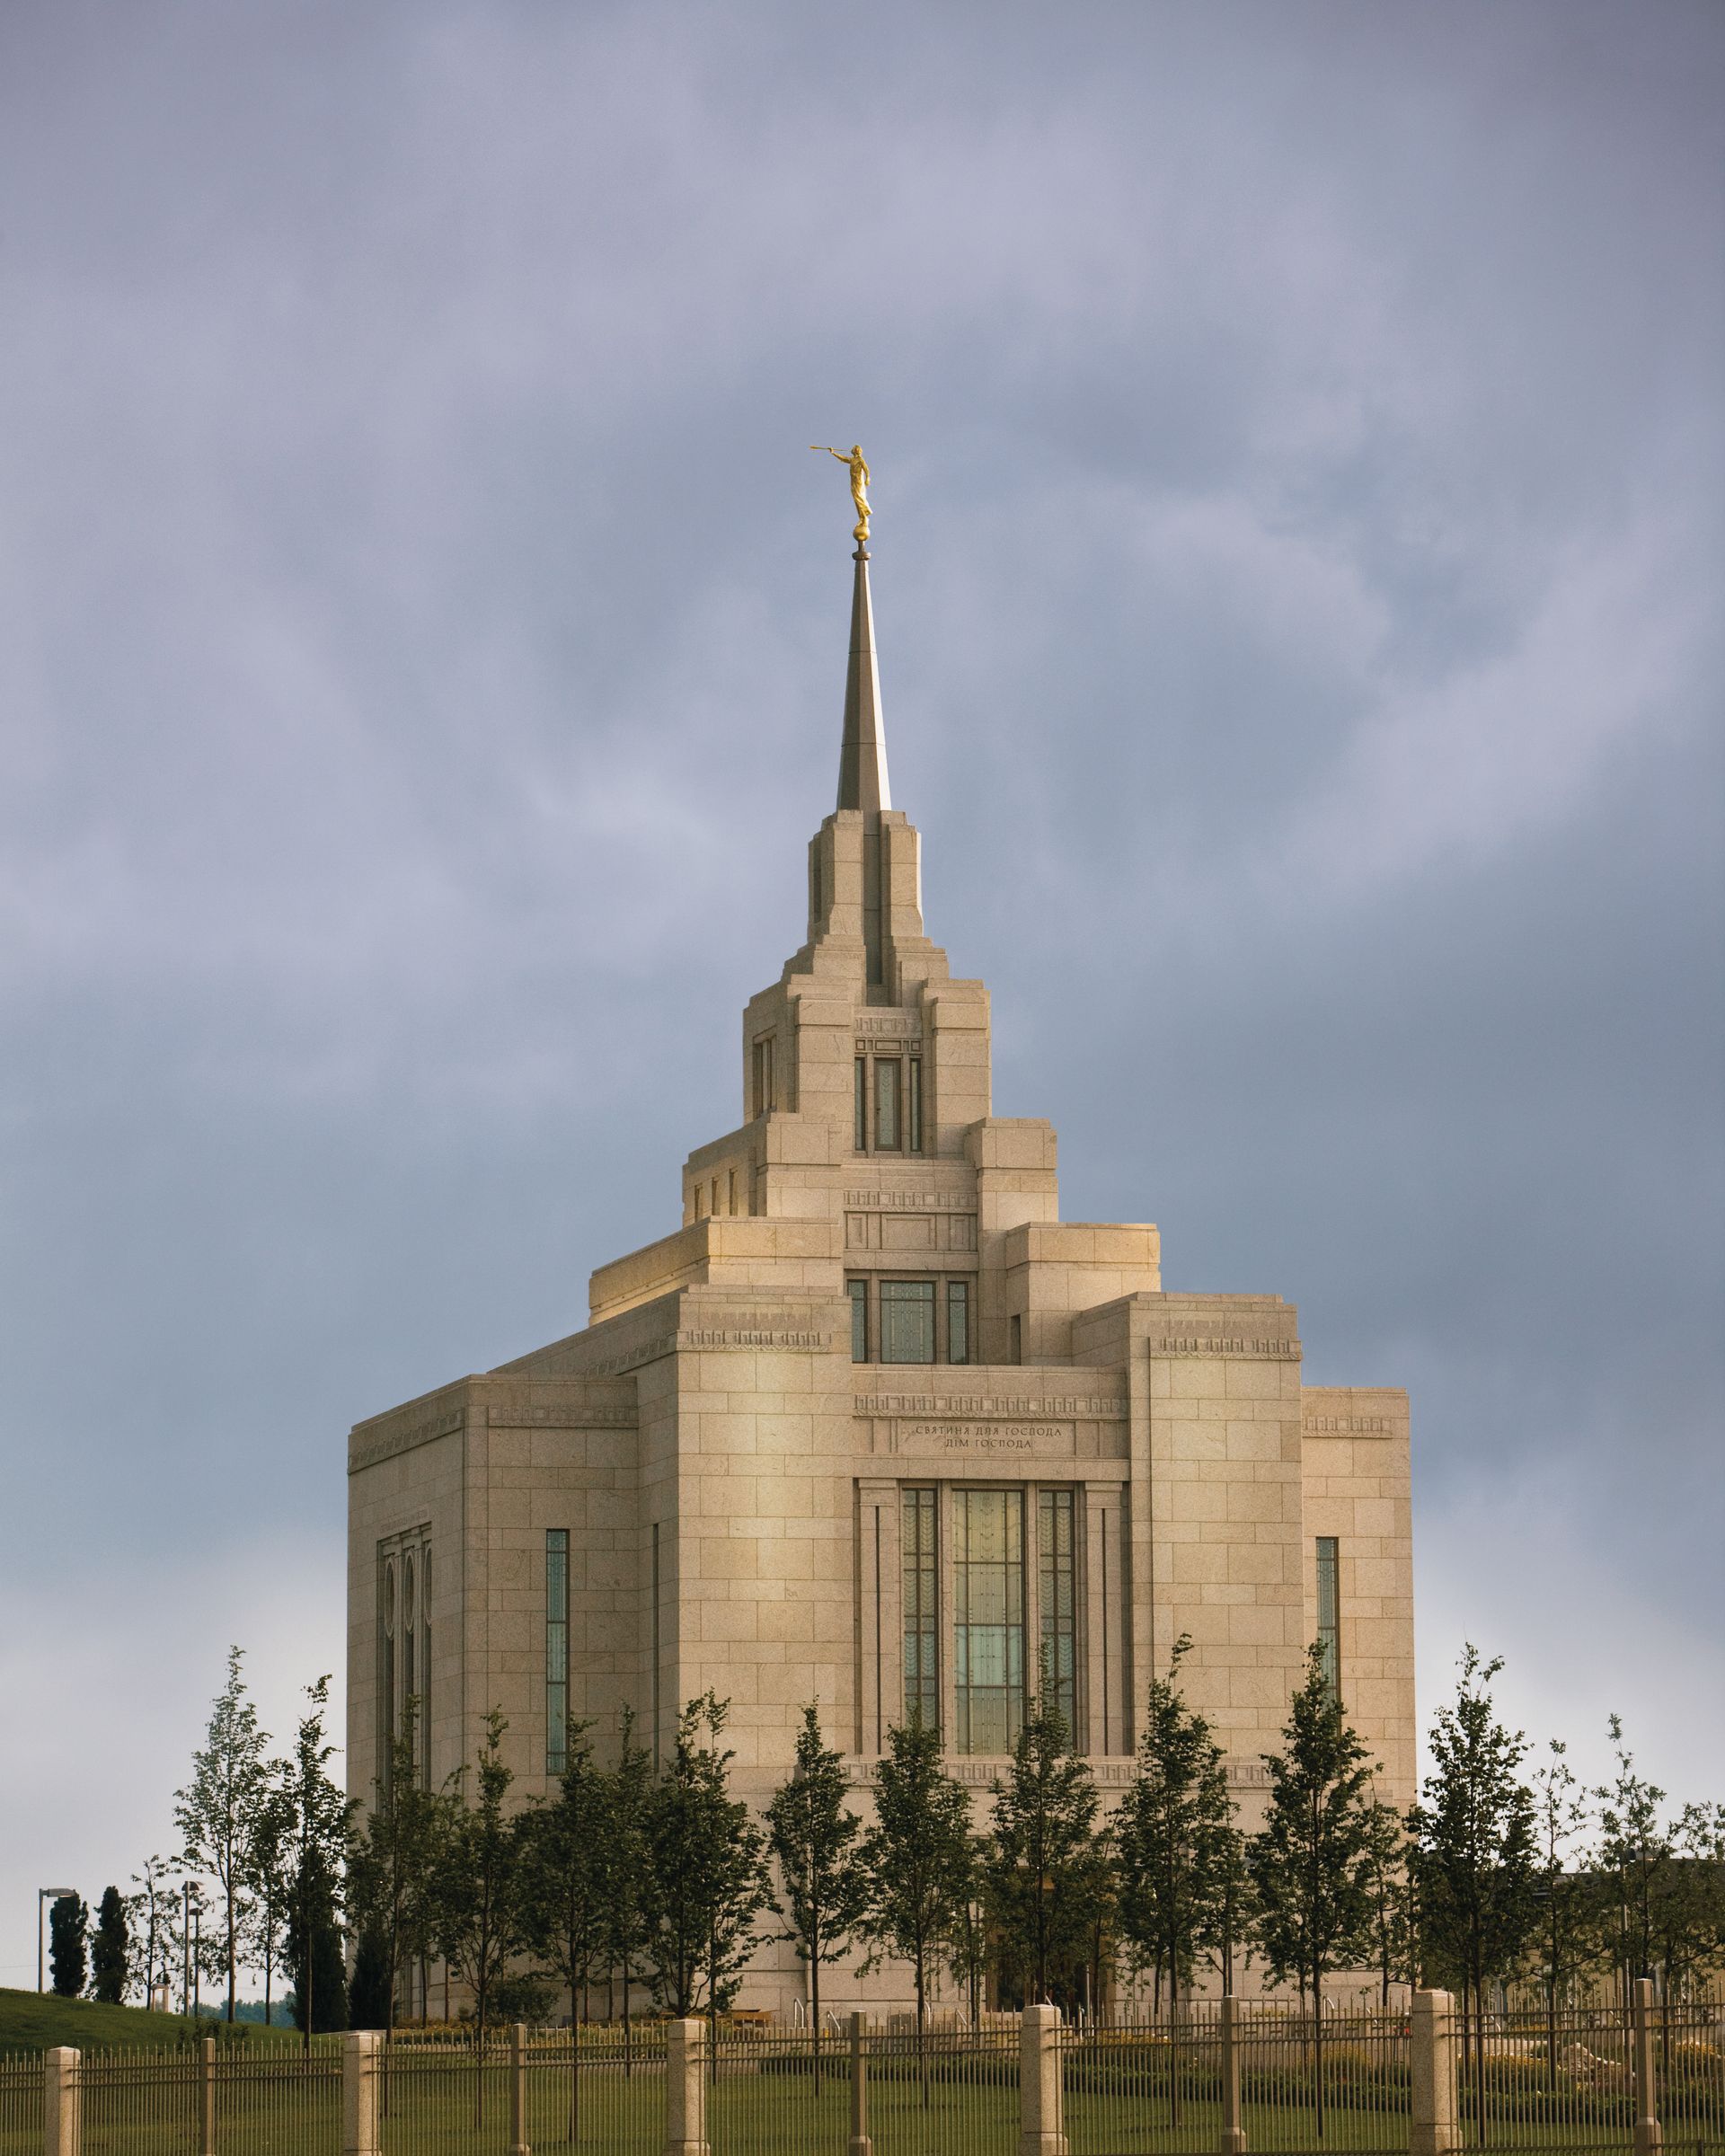 The Kyiv Ukraine Temple during the daytime, including scenery.